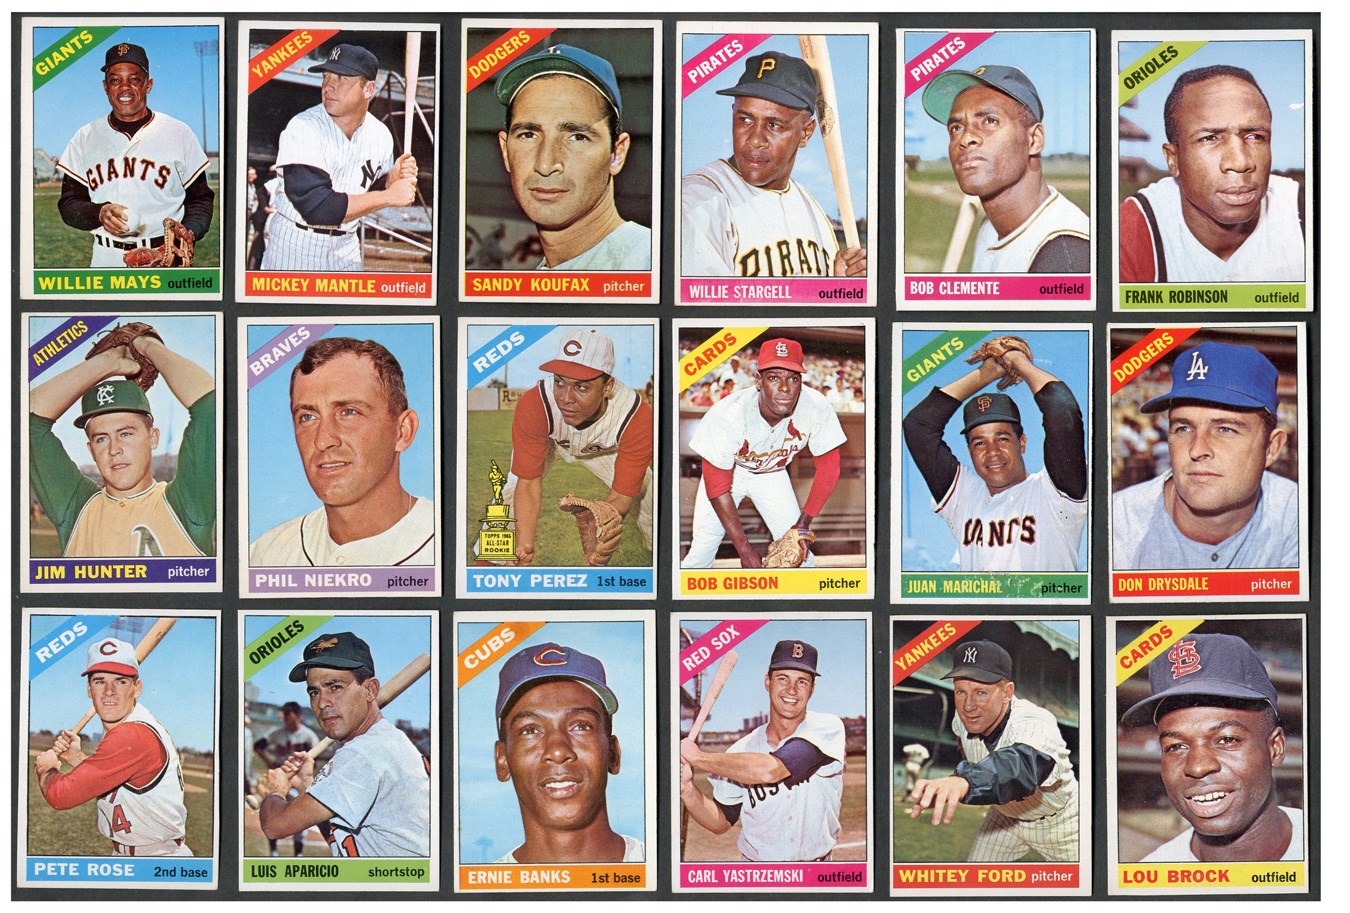 Baseball and Trading Cards - 1966 Topps HOFer and Star Card Collection (29) with Mays and Mantle